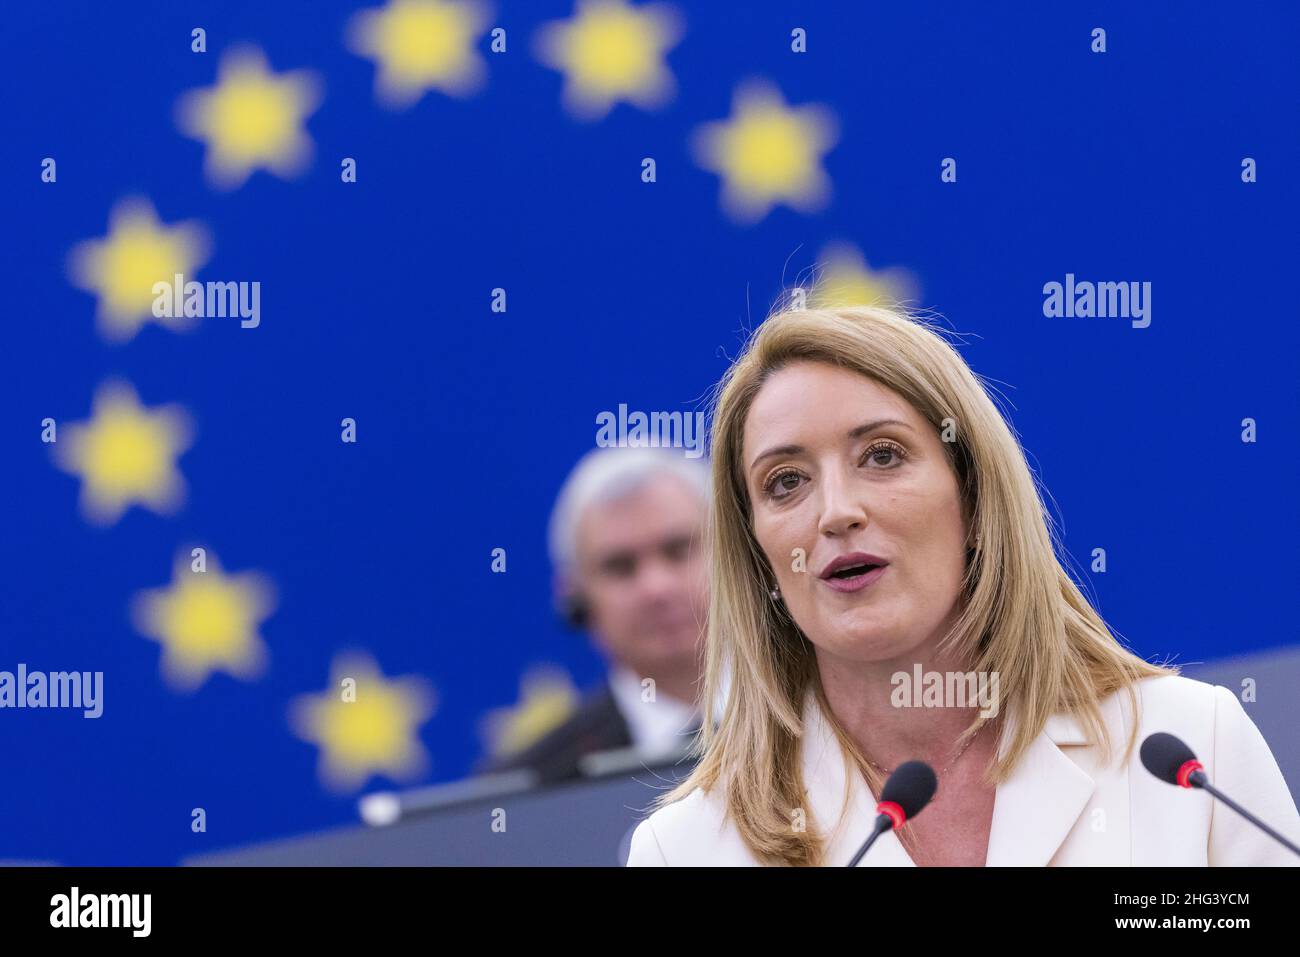 18 January 2022, France, Straßburg: Roberta Metsola (Partit Nazzjonalista), EPP Group, stands in the European Parliament building and speaks. The candidates for the election of the new EU Parliament President introduce themselves in the EU Parliament. Photo: Philipp von Ditfurth/dpa Stock Photo